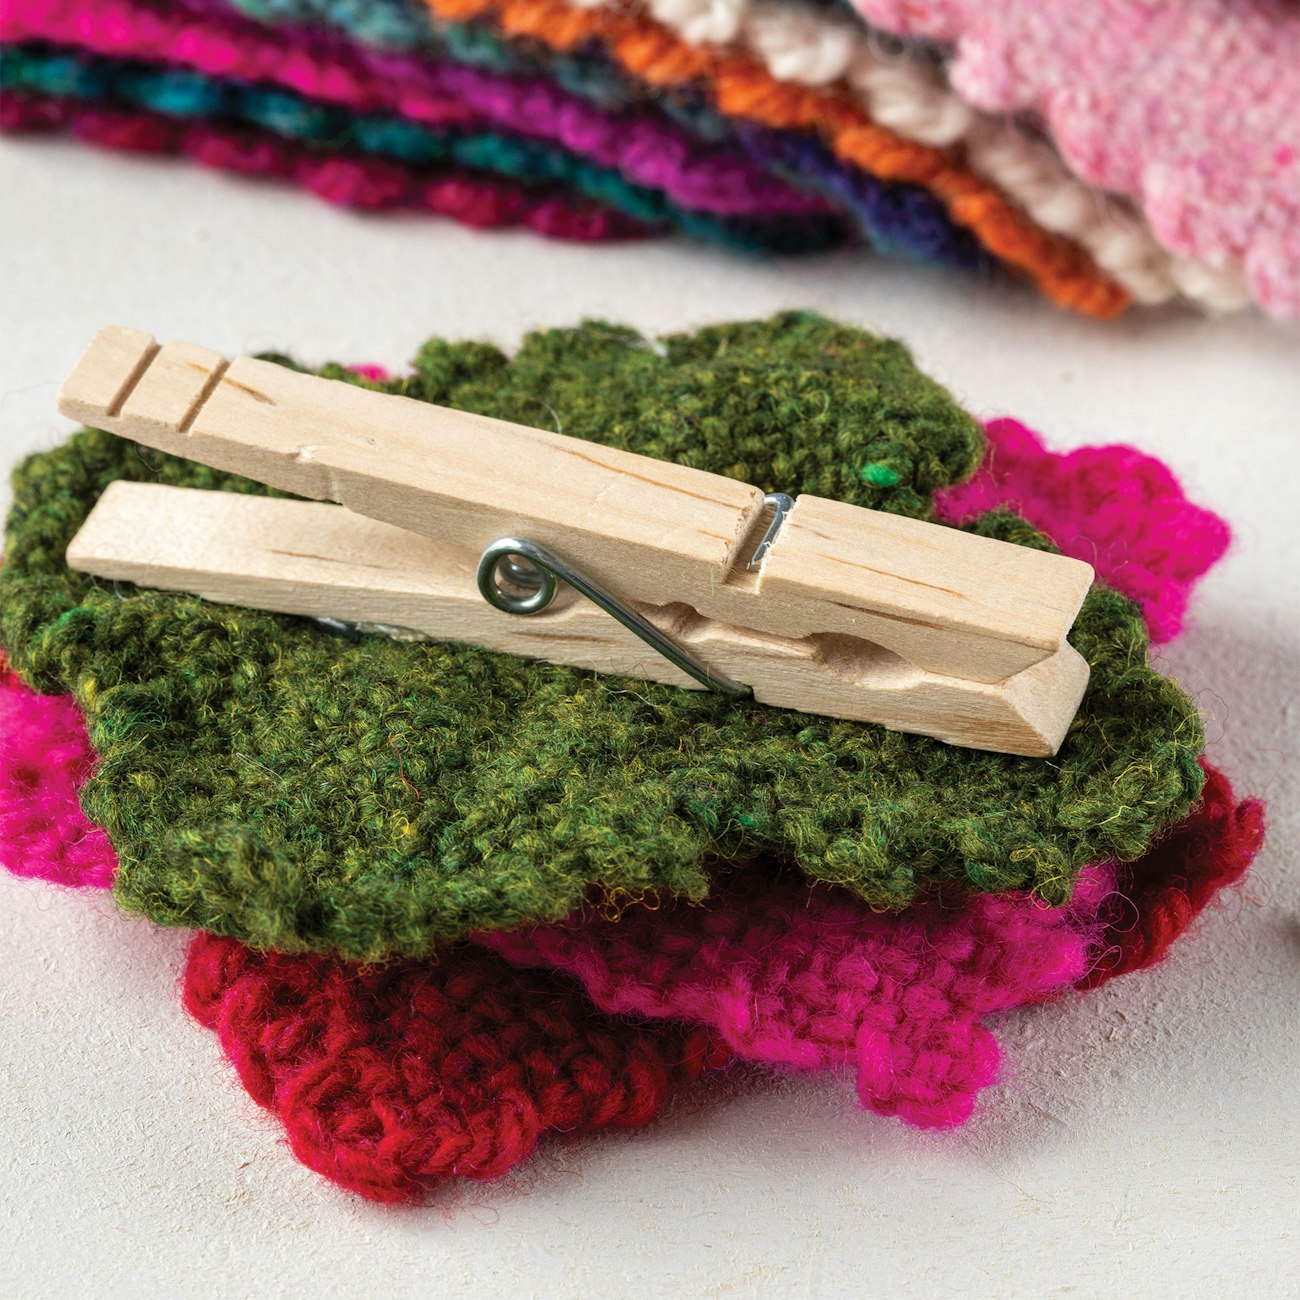 The assembled flower with leaves glued to a clothespin.